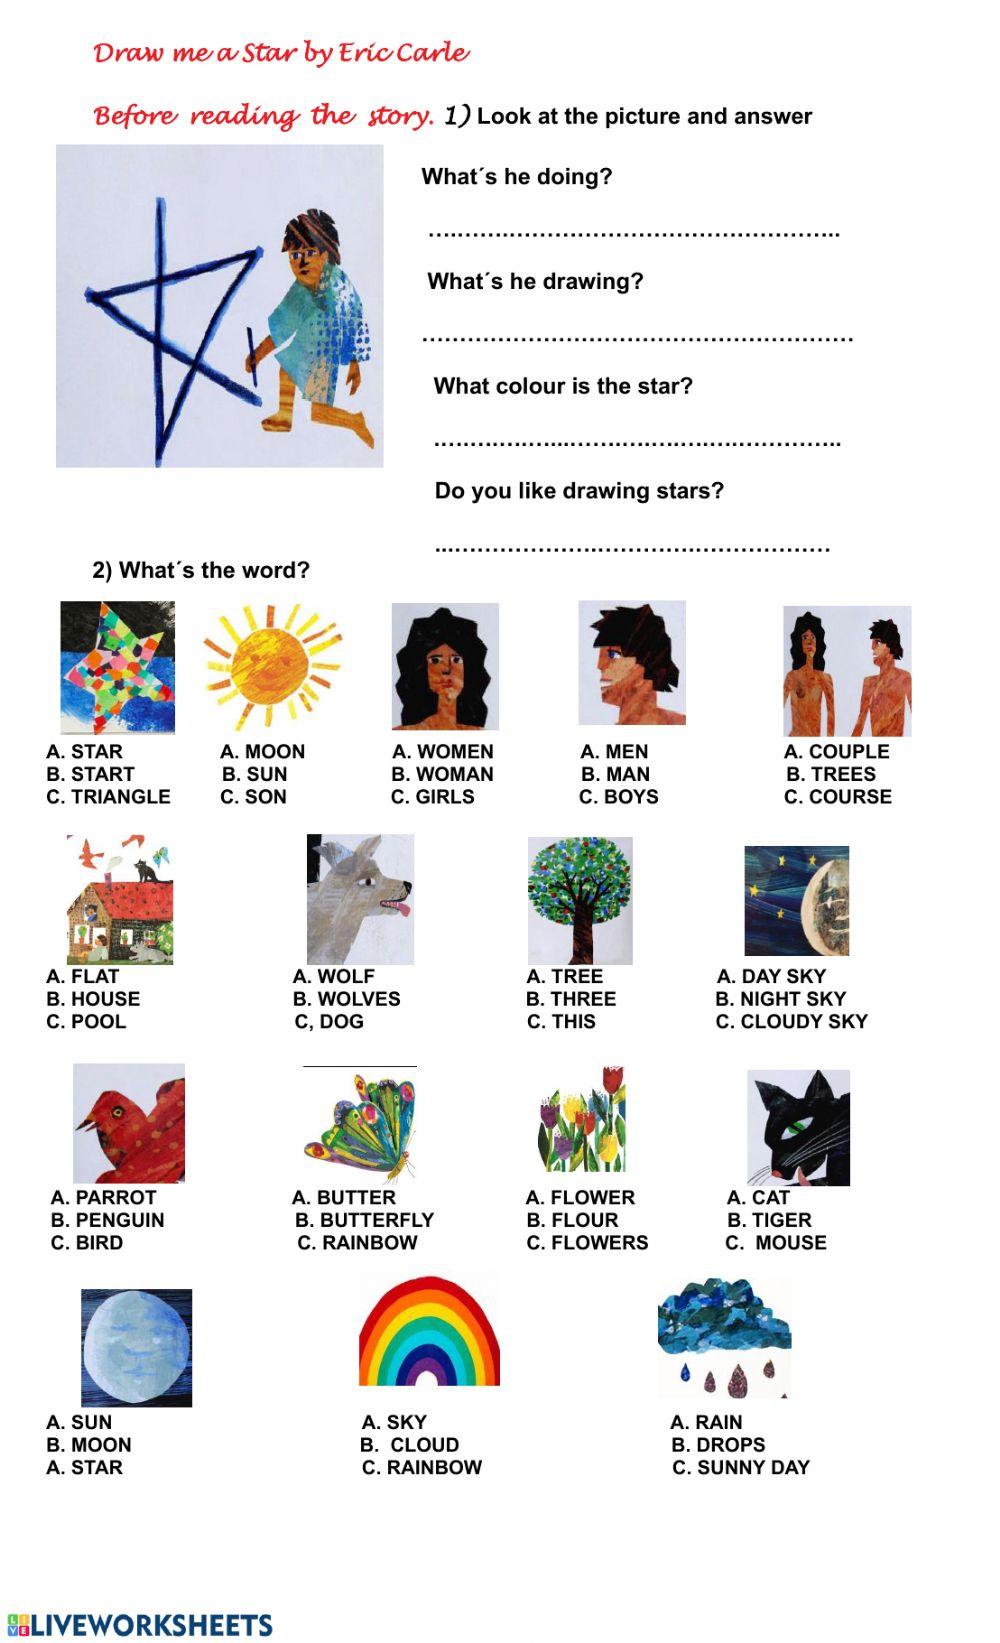 Draw me a Star by Eric Carle